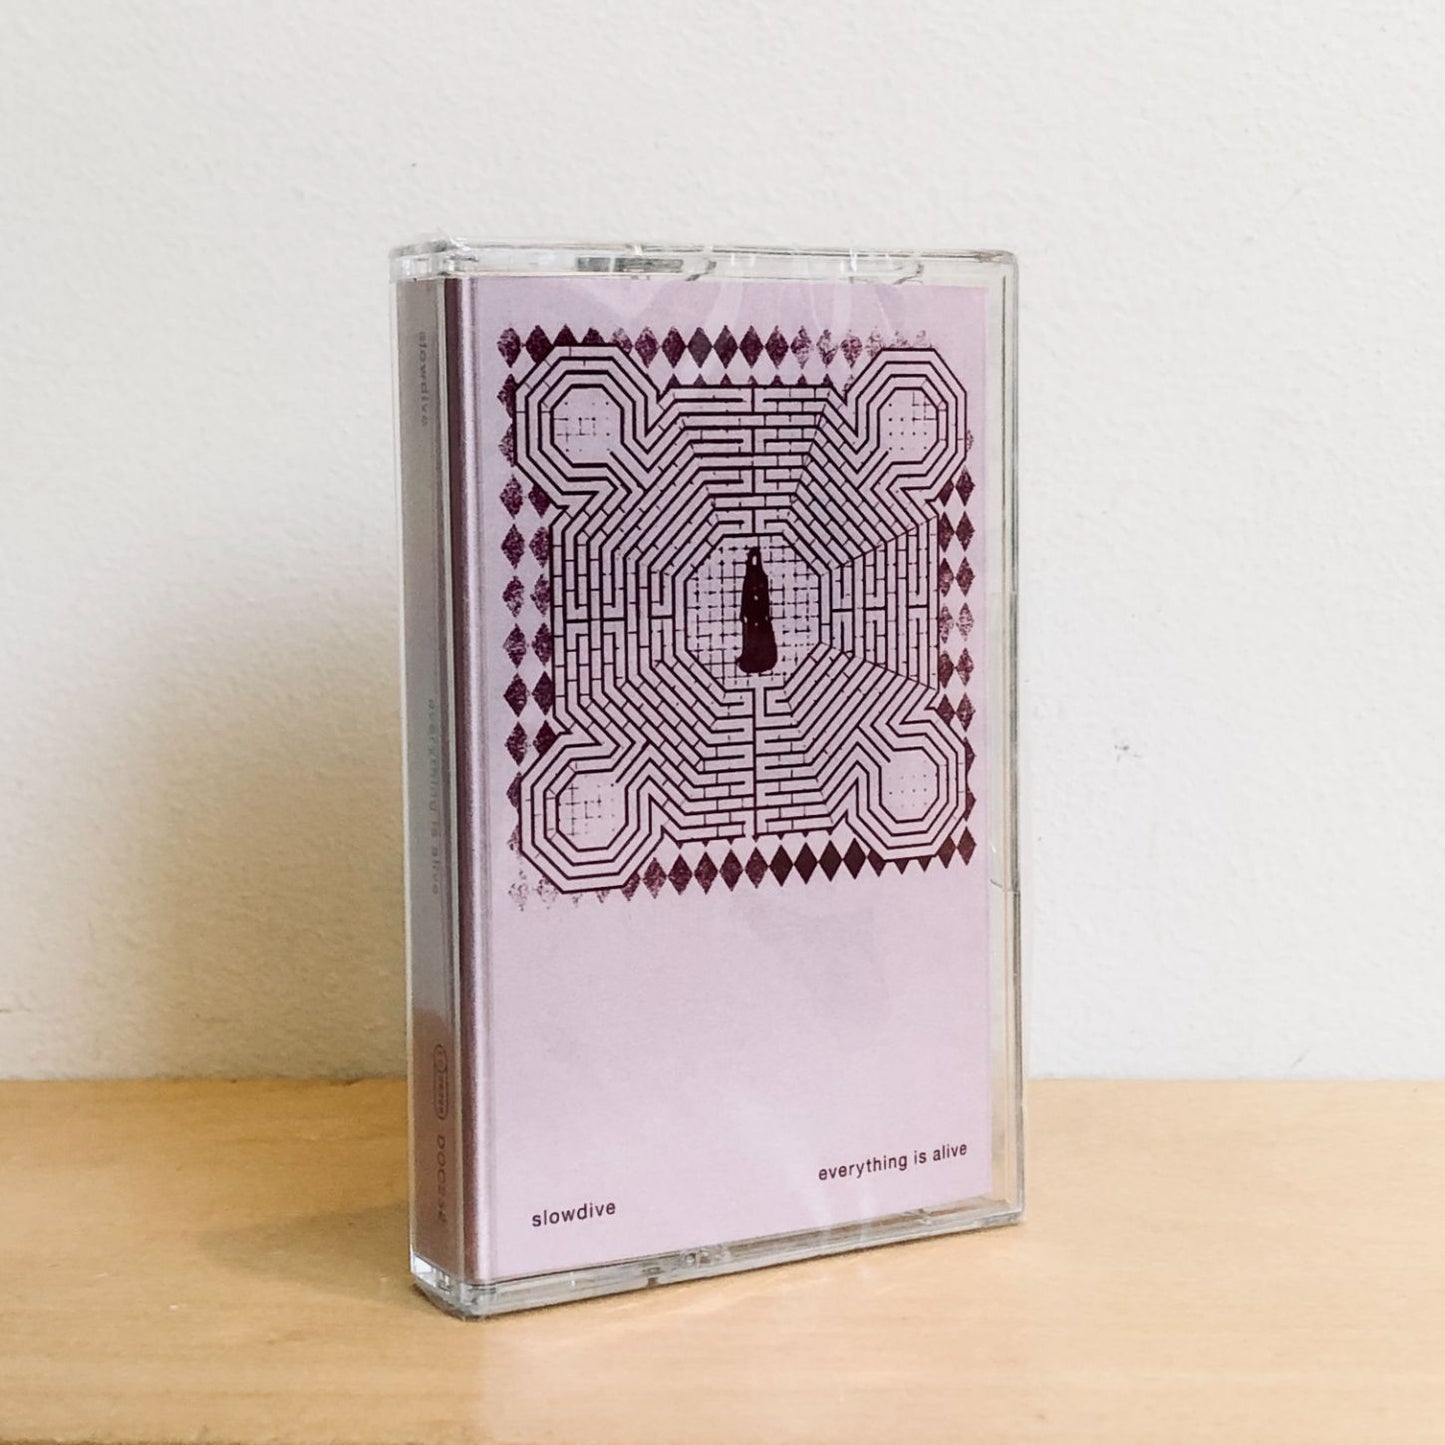 Slowdive - everything is alive. Cassette